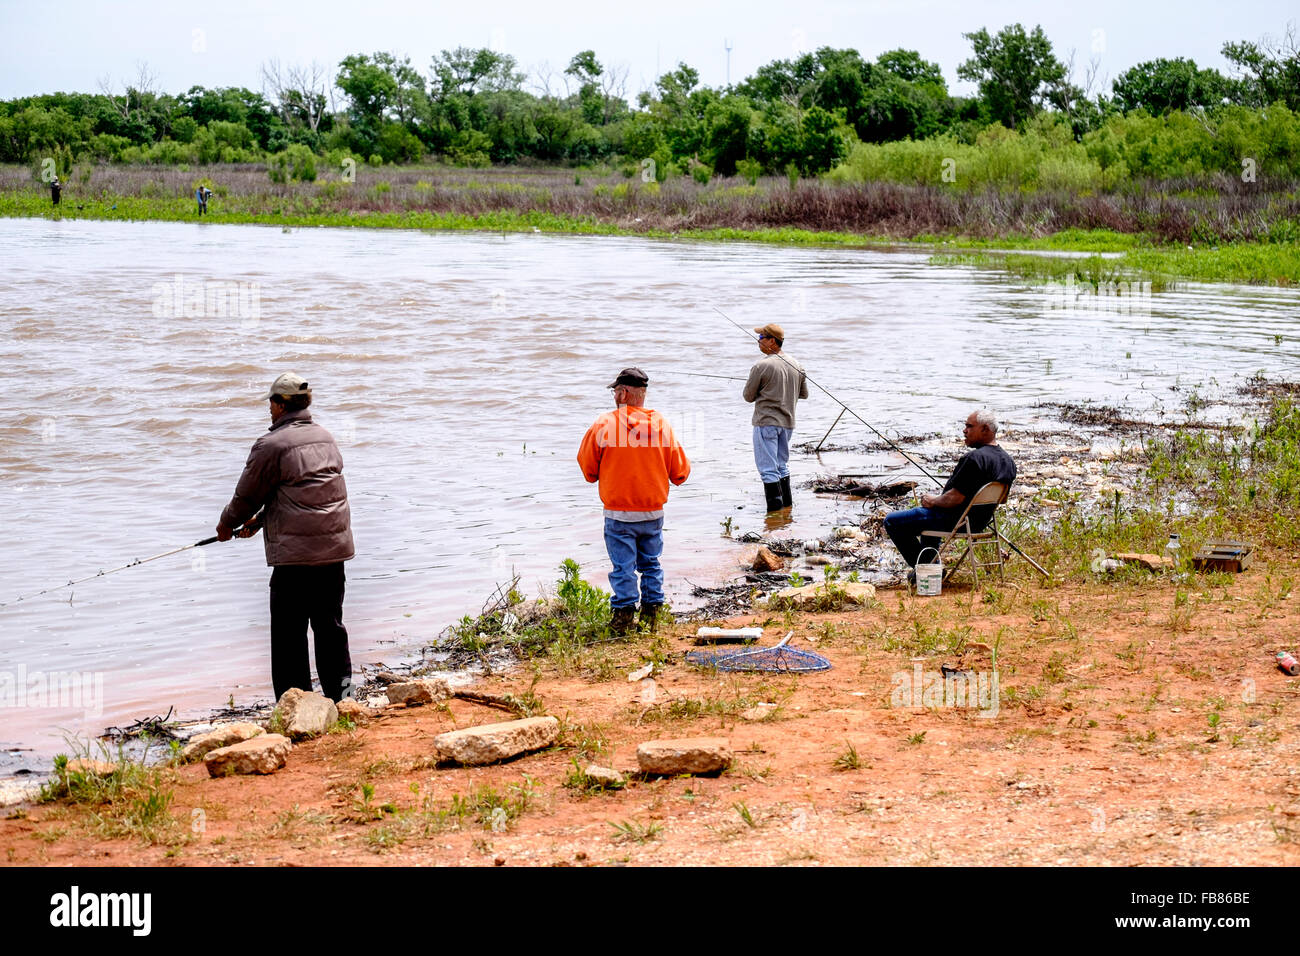 People fish in the rising waters of Hefner Lake in Oklahoma City after a spring rain. Oklahoma, USA. Stock Photo